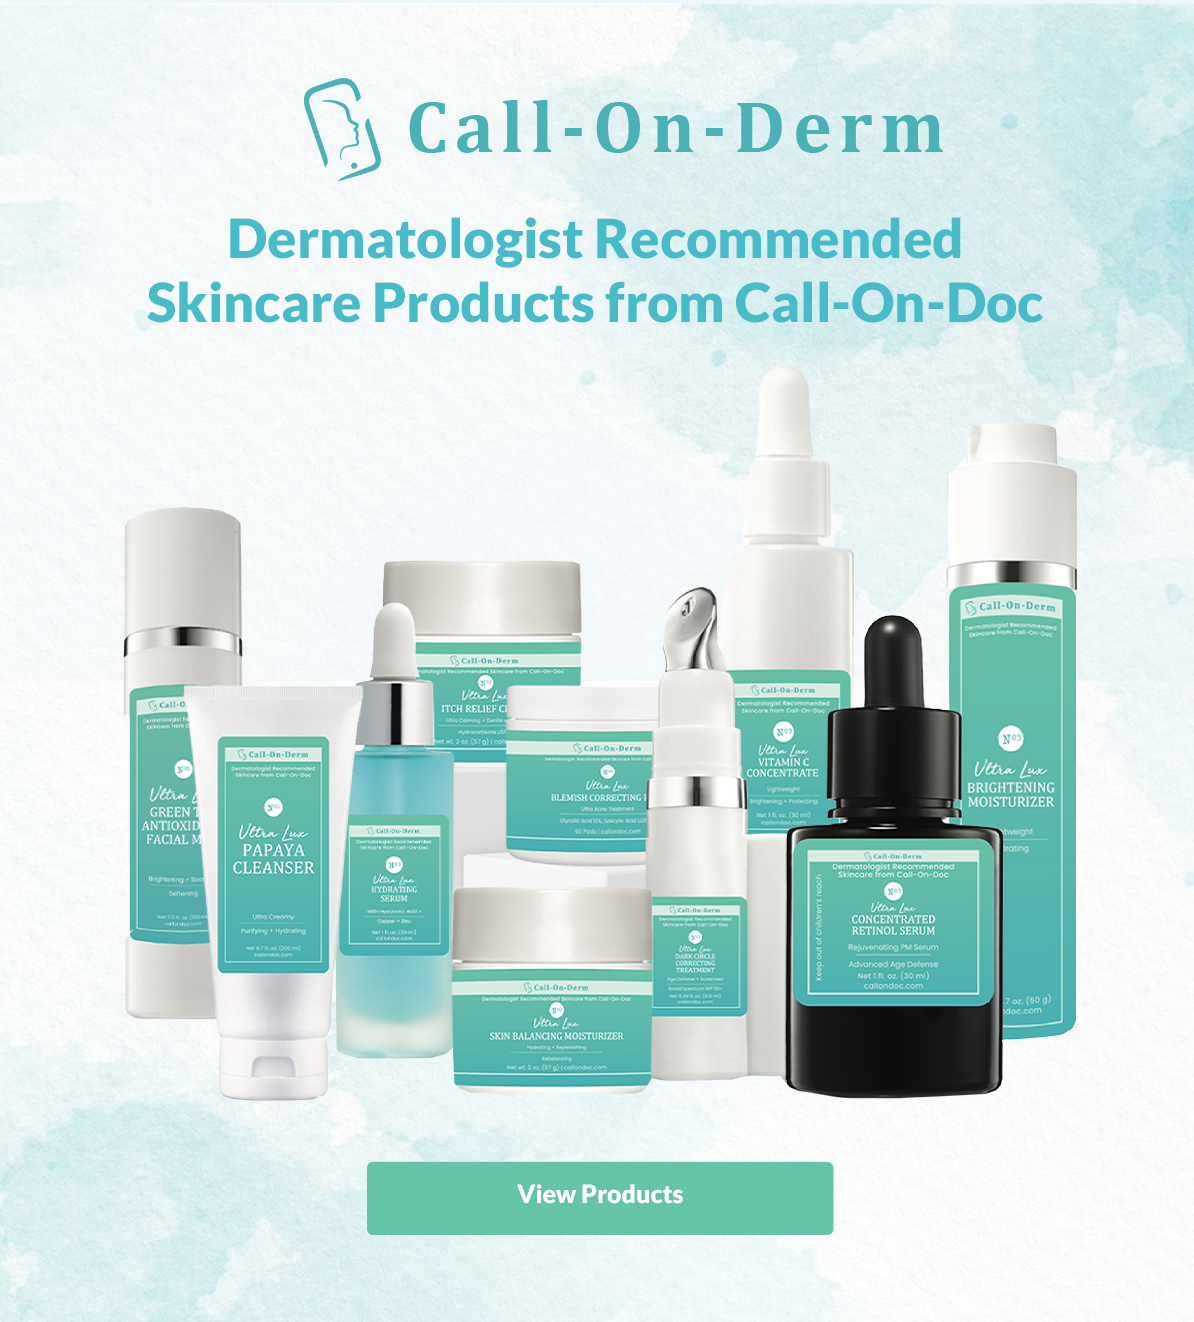 DERMATOLOGY PRODUCTS: Introducing Call-On-Derm